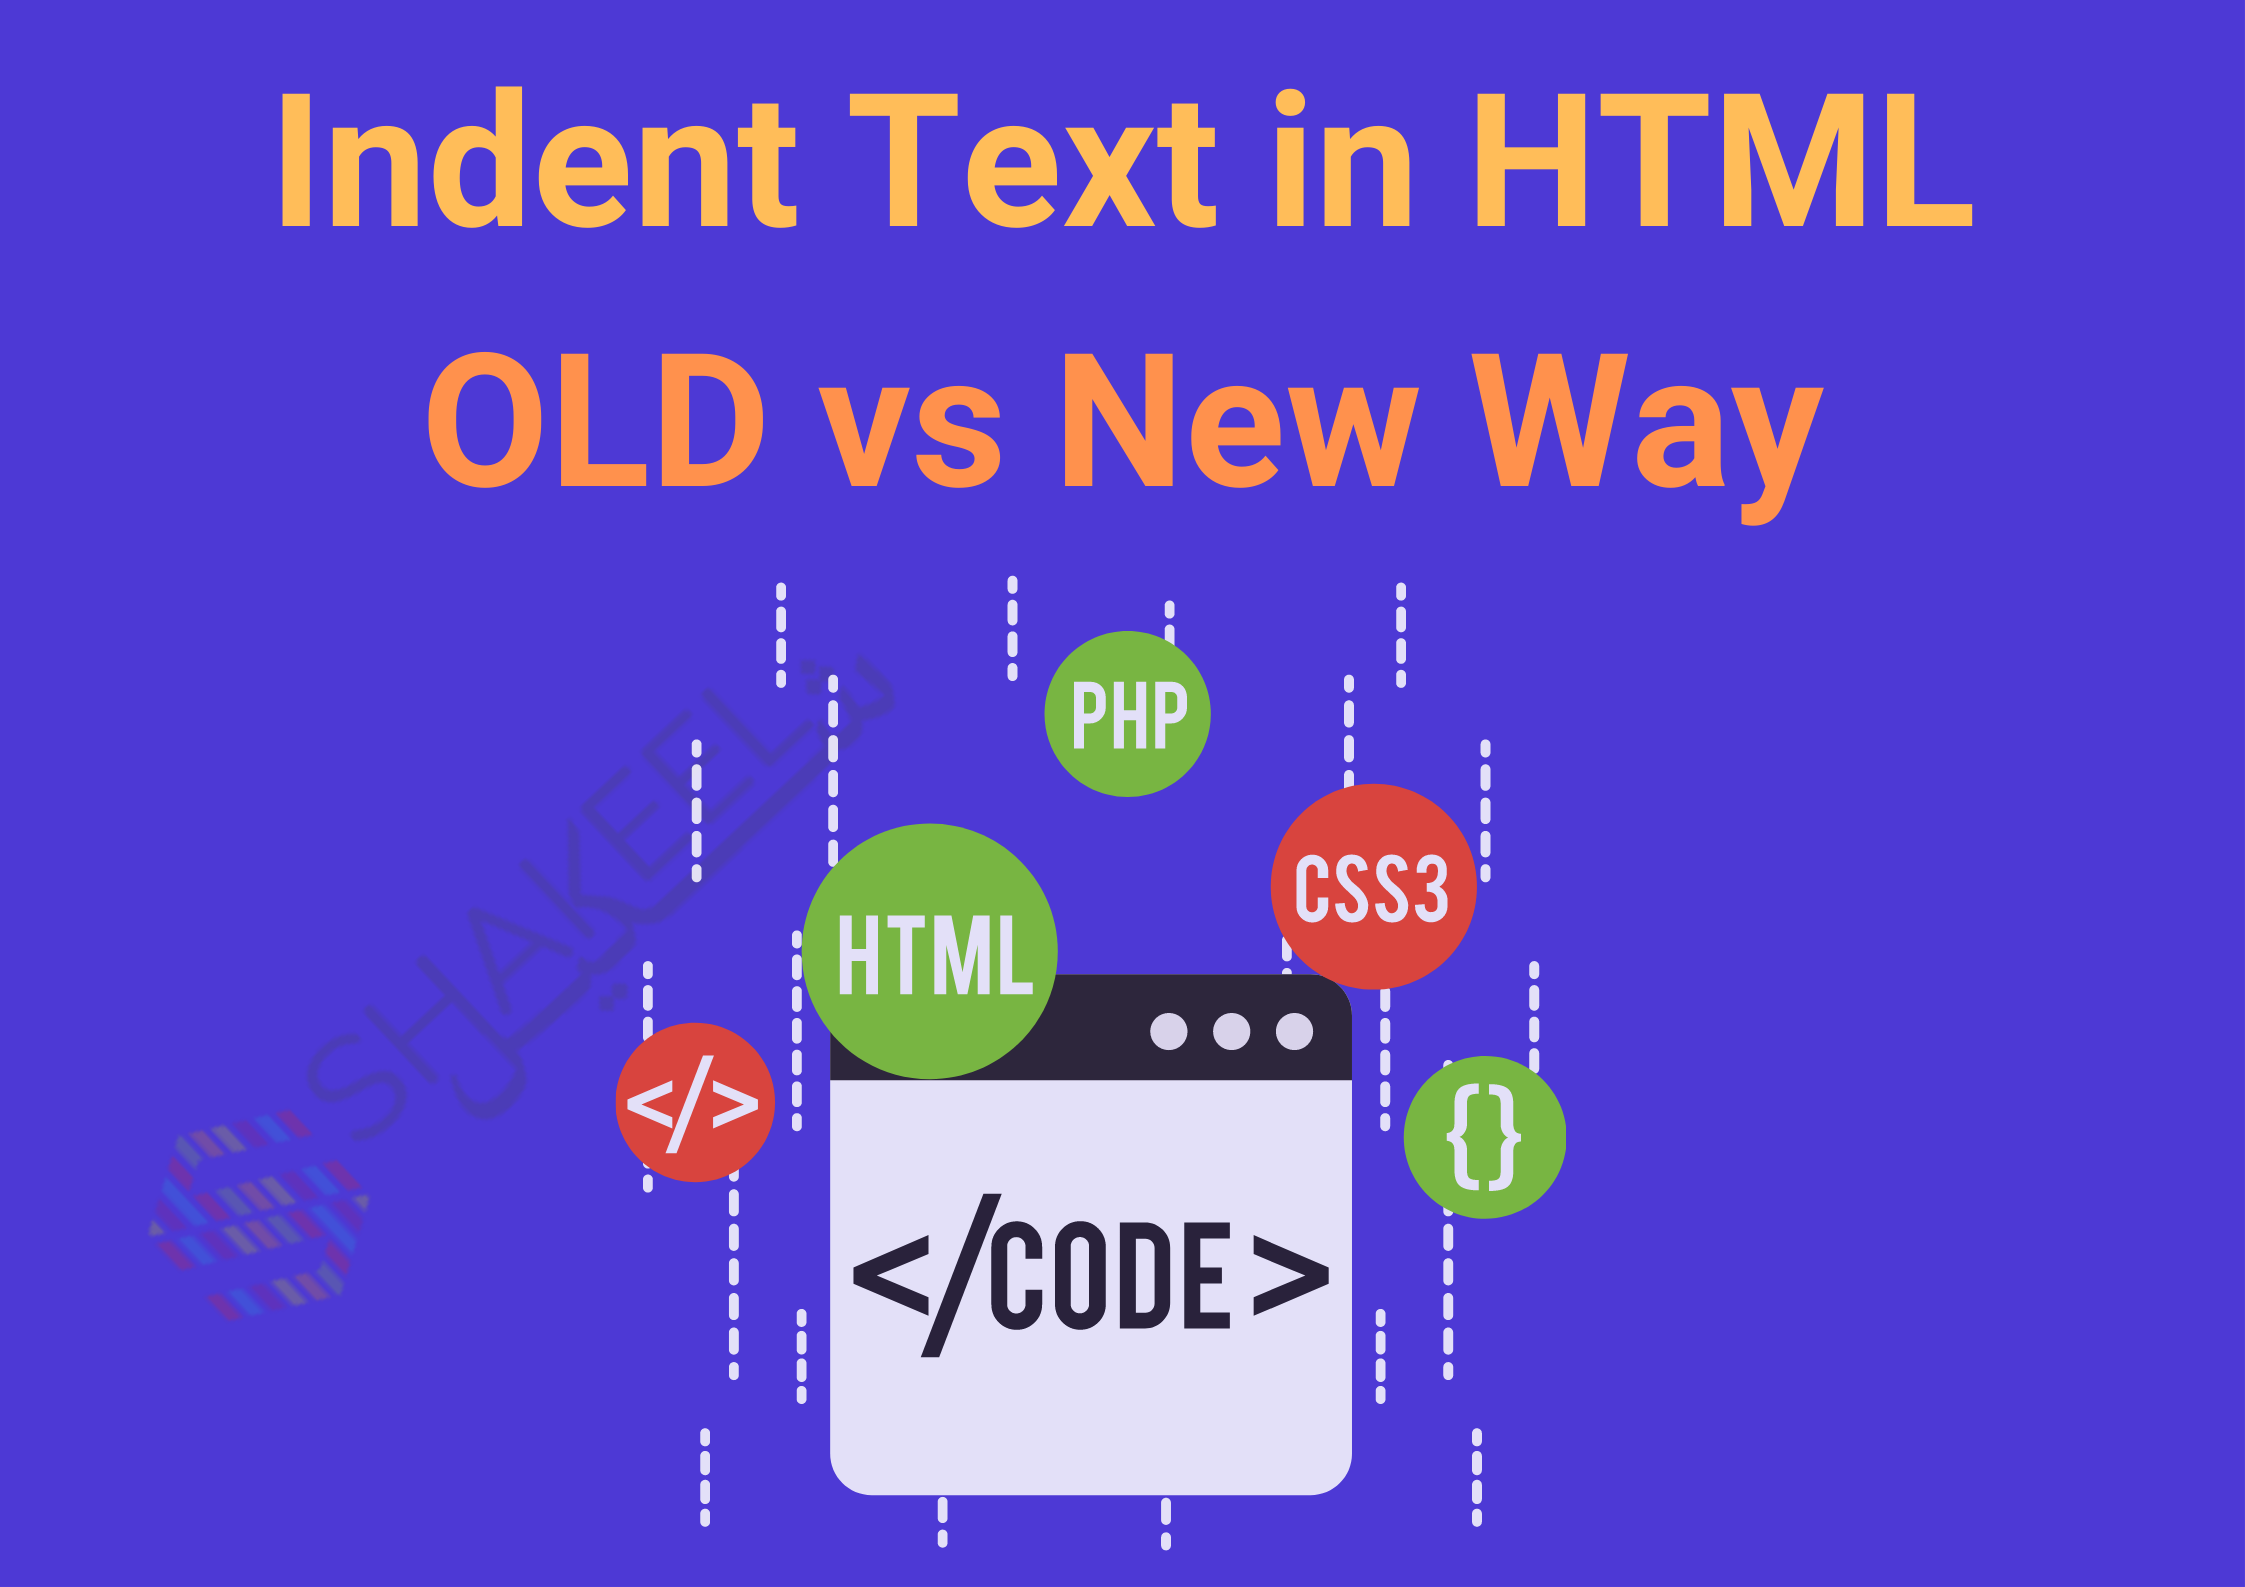 How do I Indent Text in HTML Using CSS?